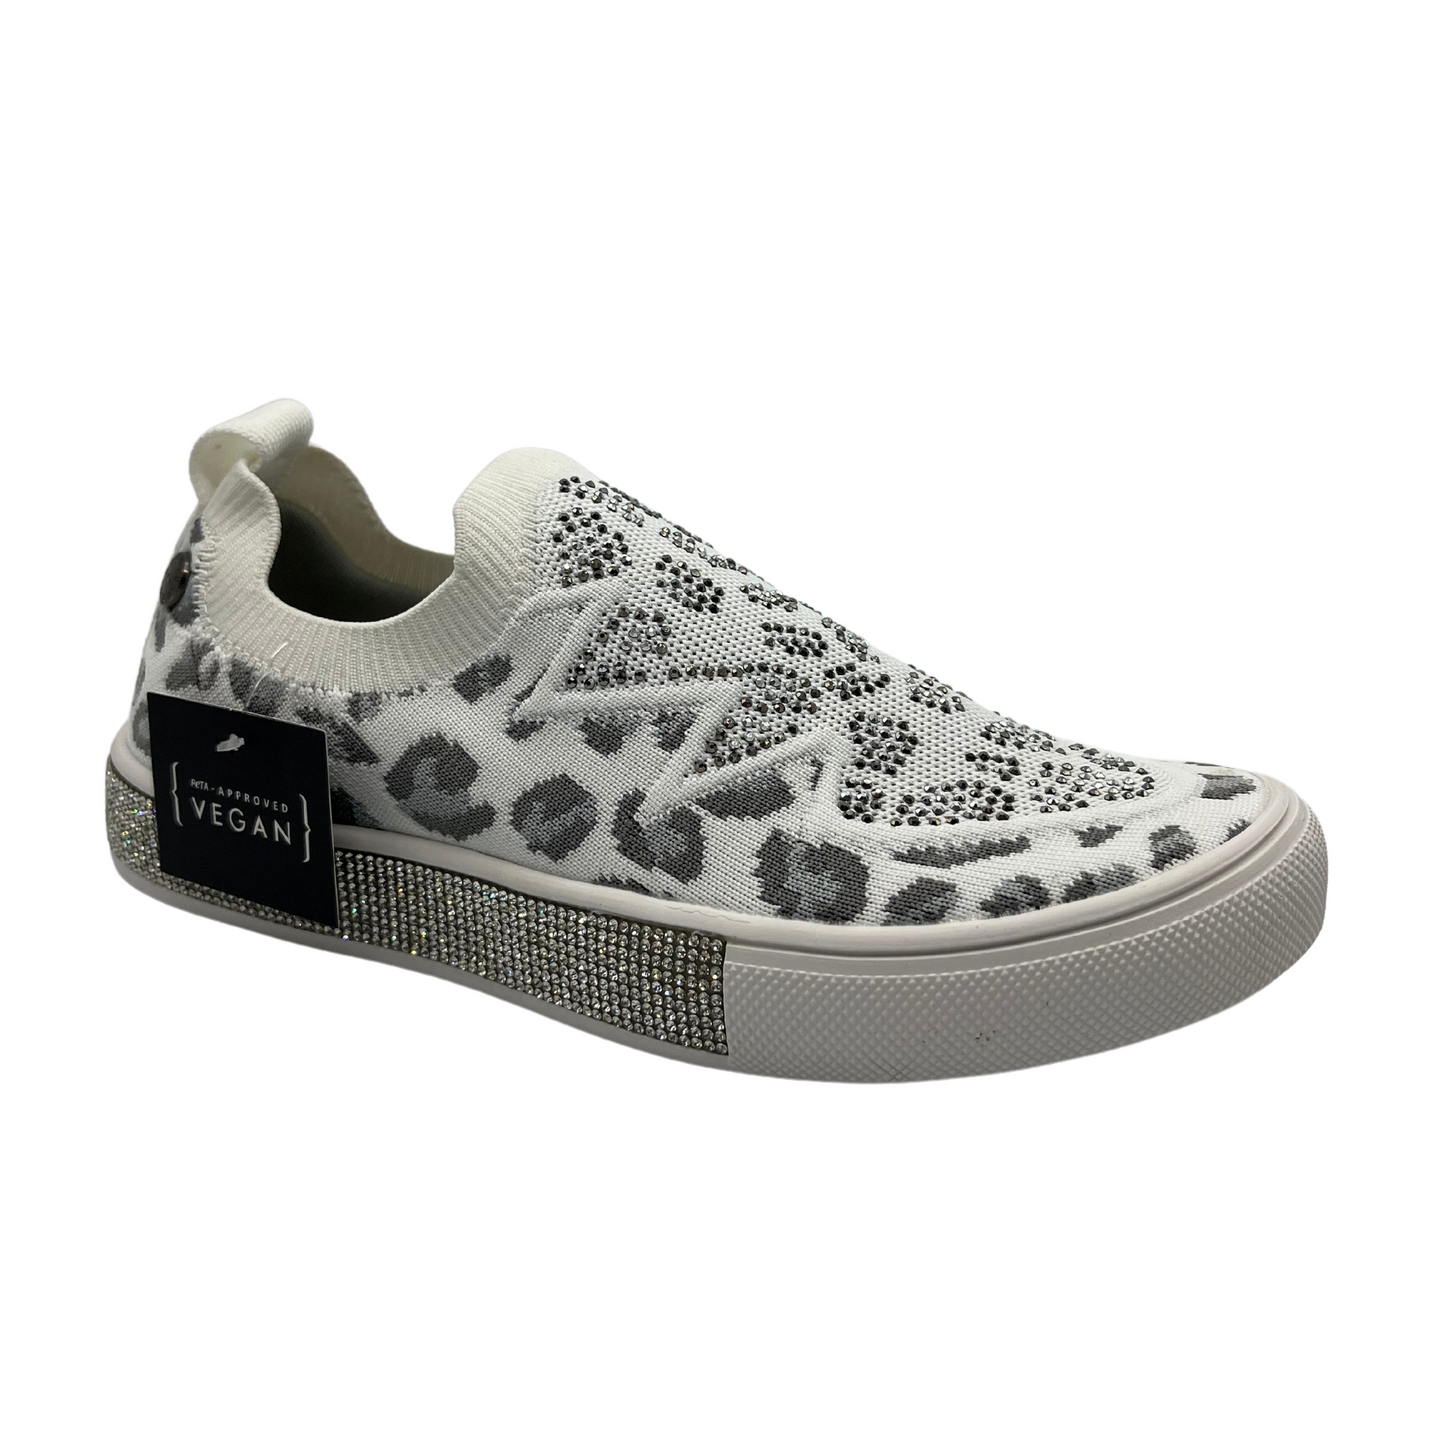 45 degree angled view of a slip on style sneaker in a fun leopard print with silver crystal accents. Shown in white